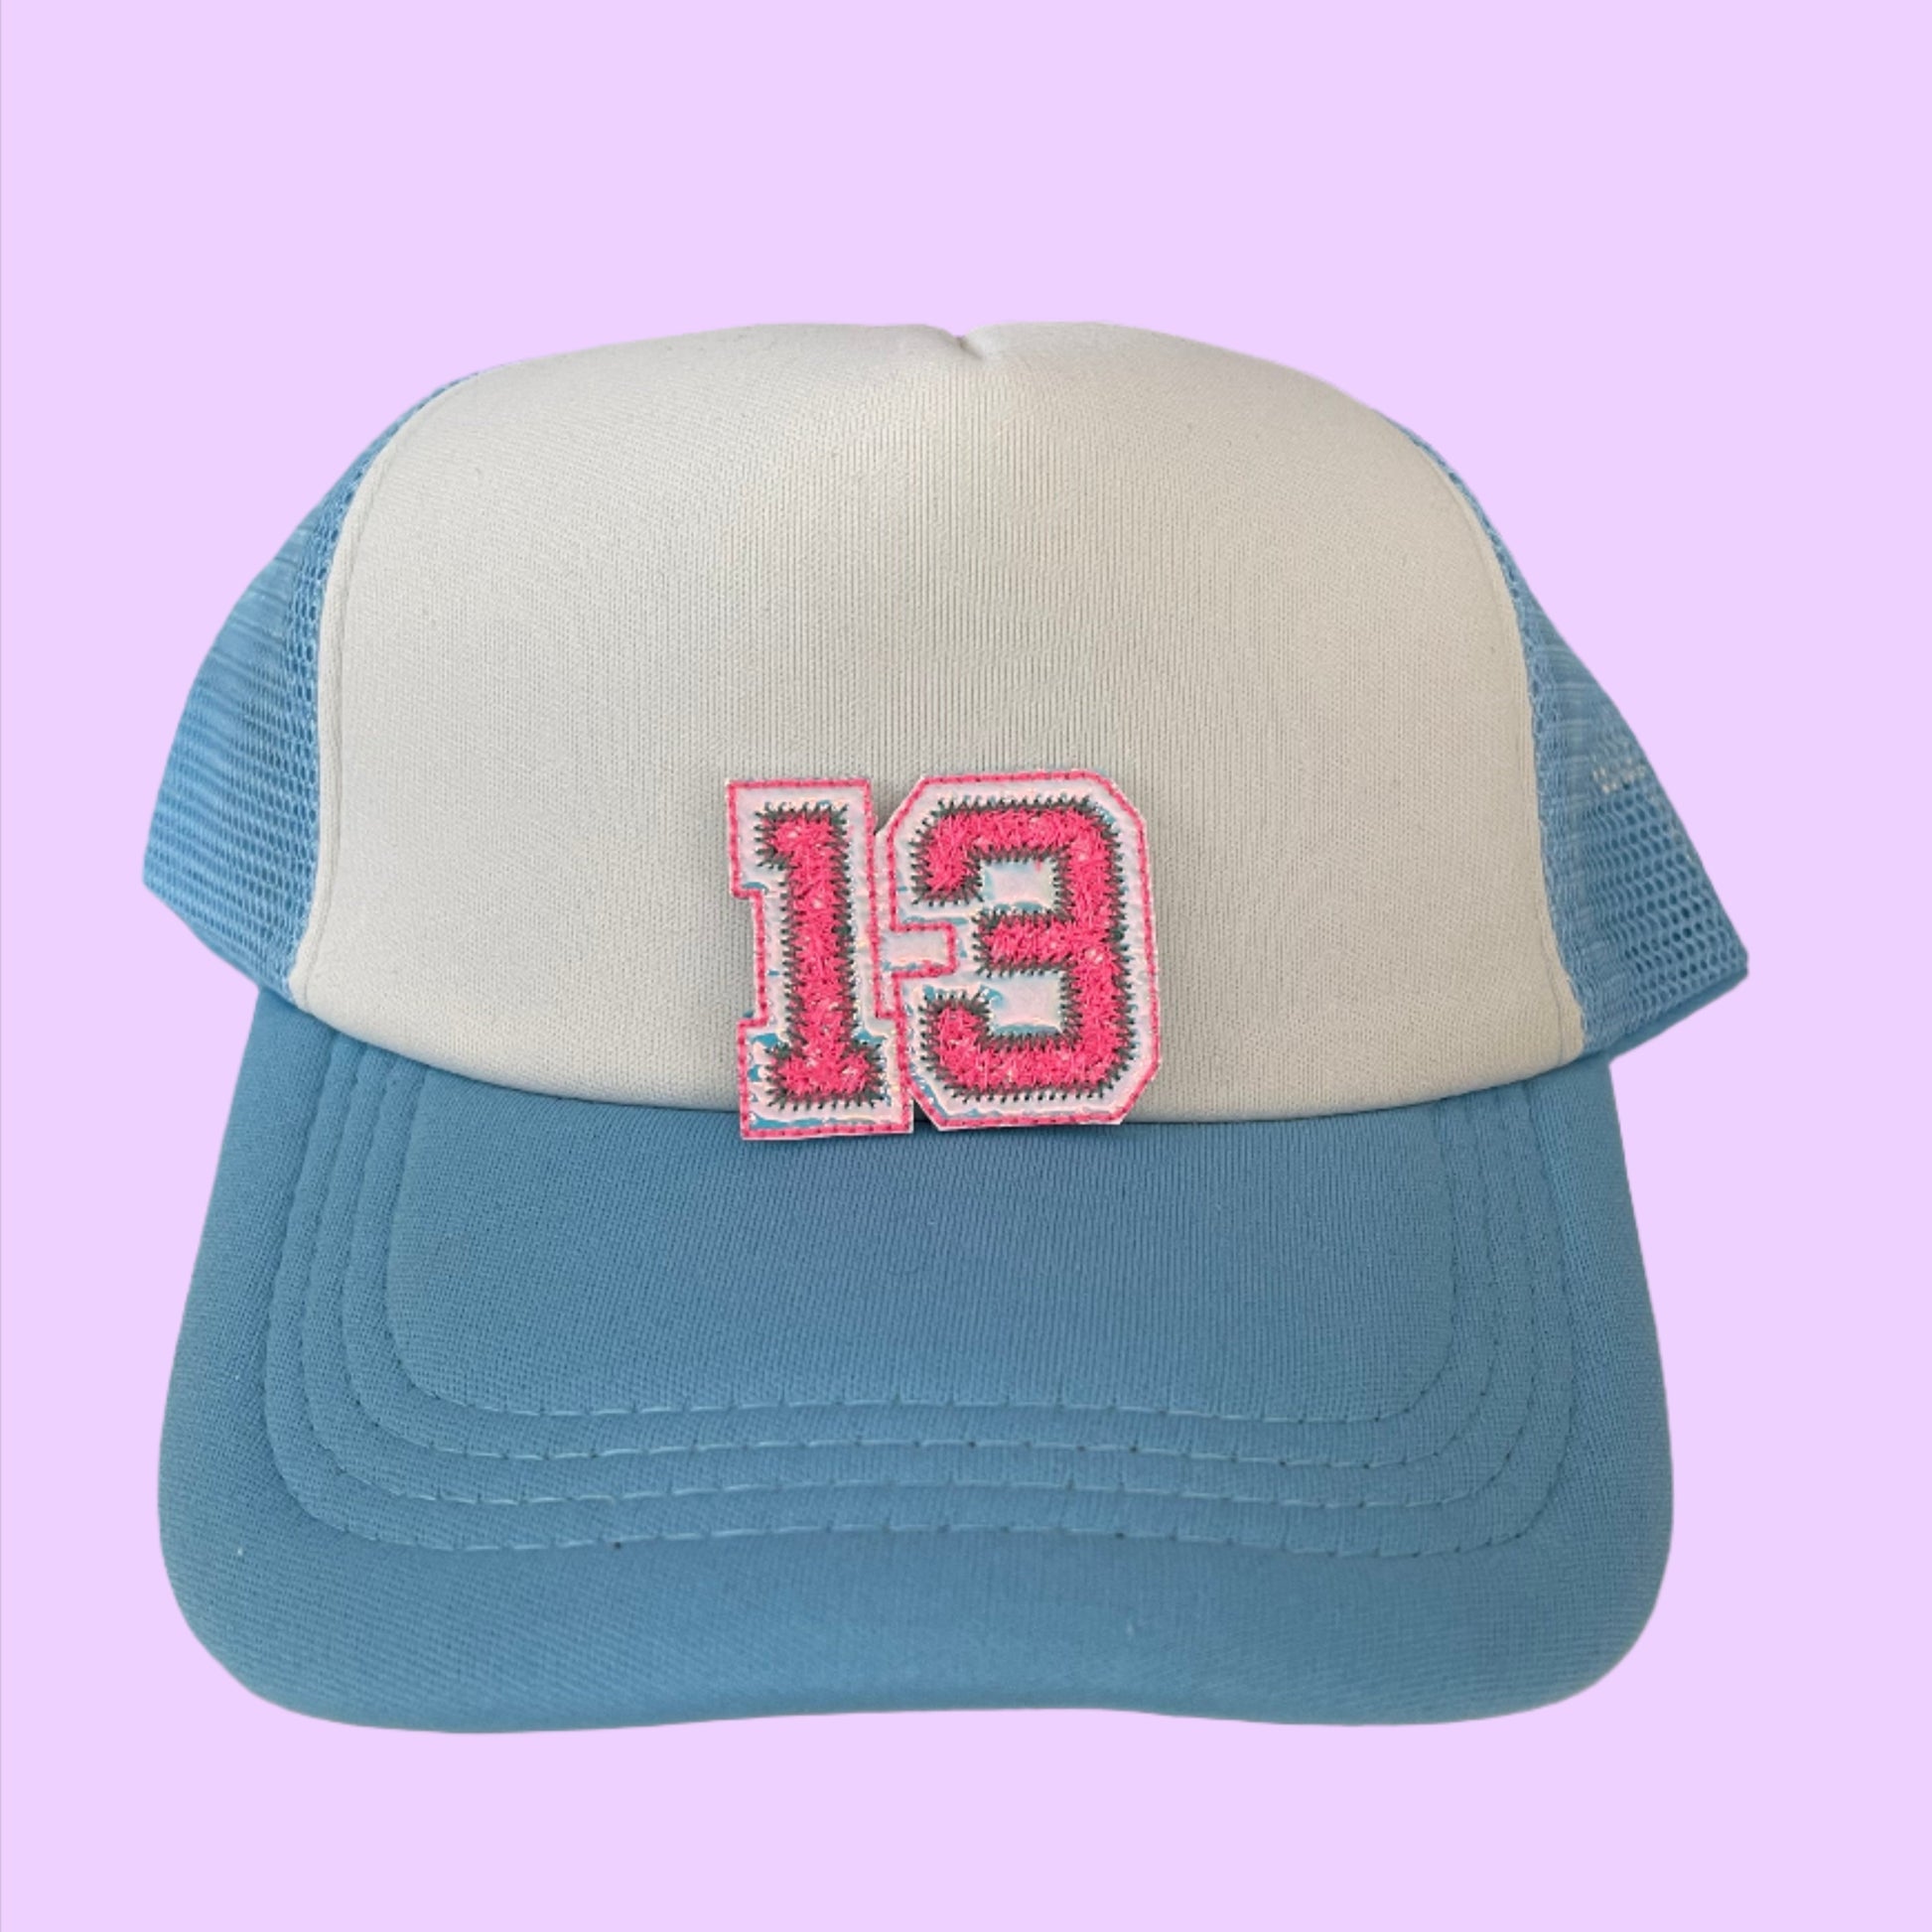 Taylor Swift Lucky 13 varsity style embroidered patch in pink and white, perfect for customizing clothing and accessories.